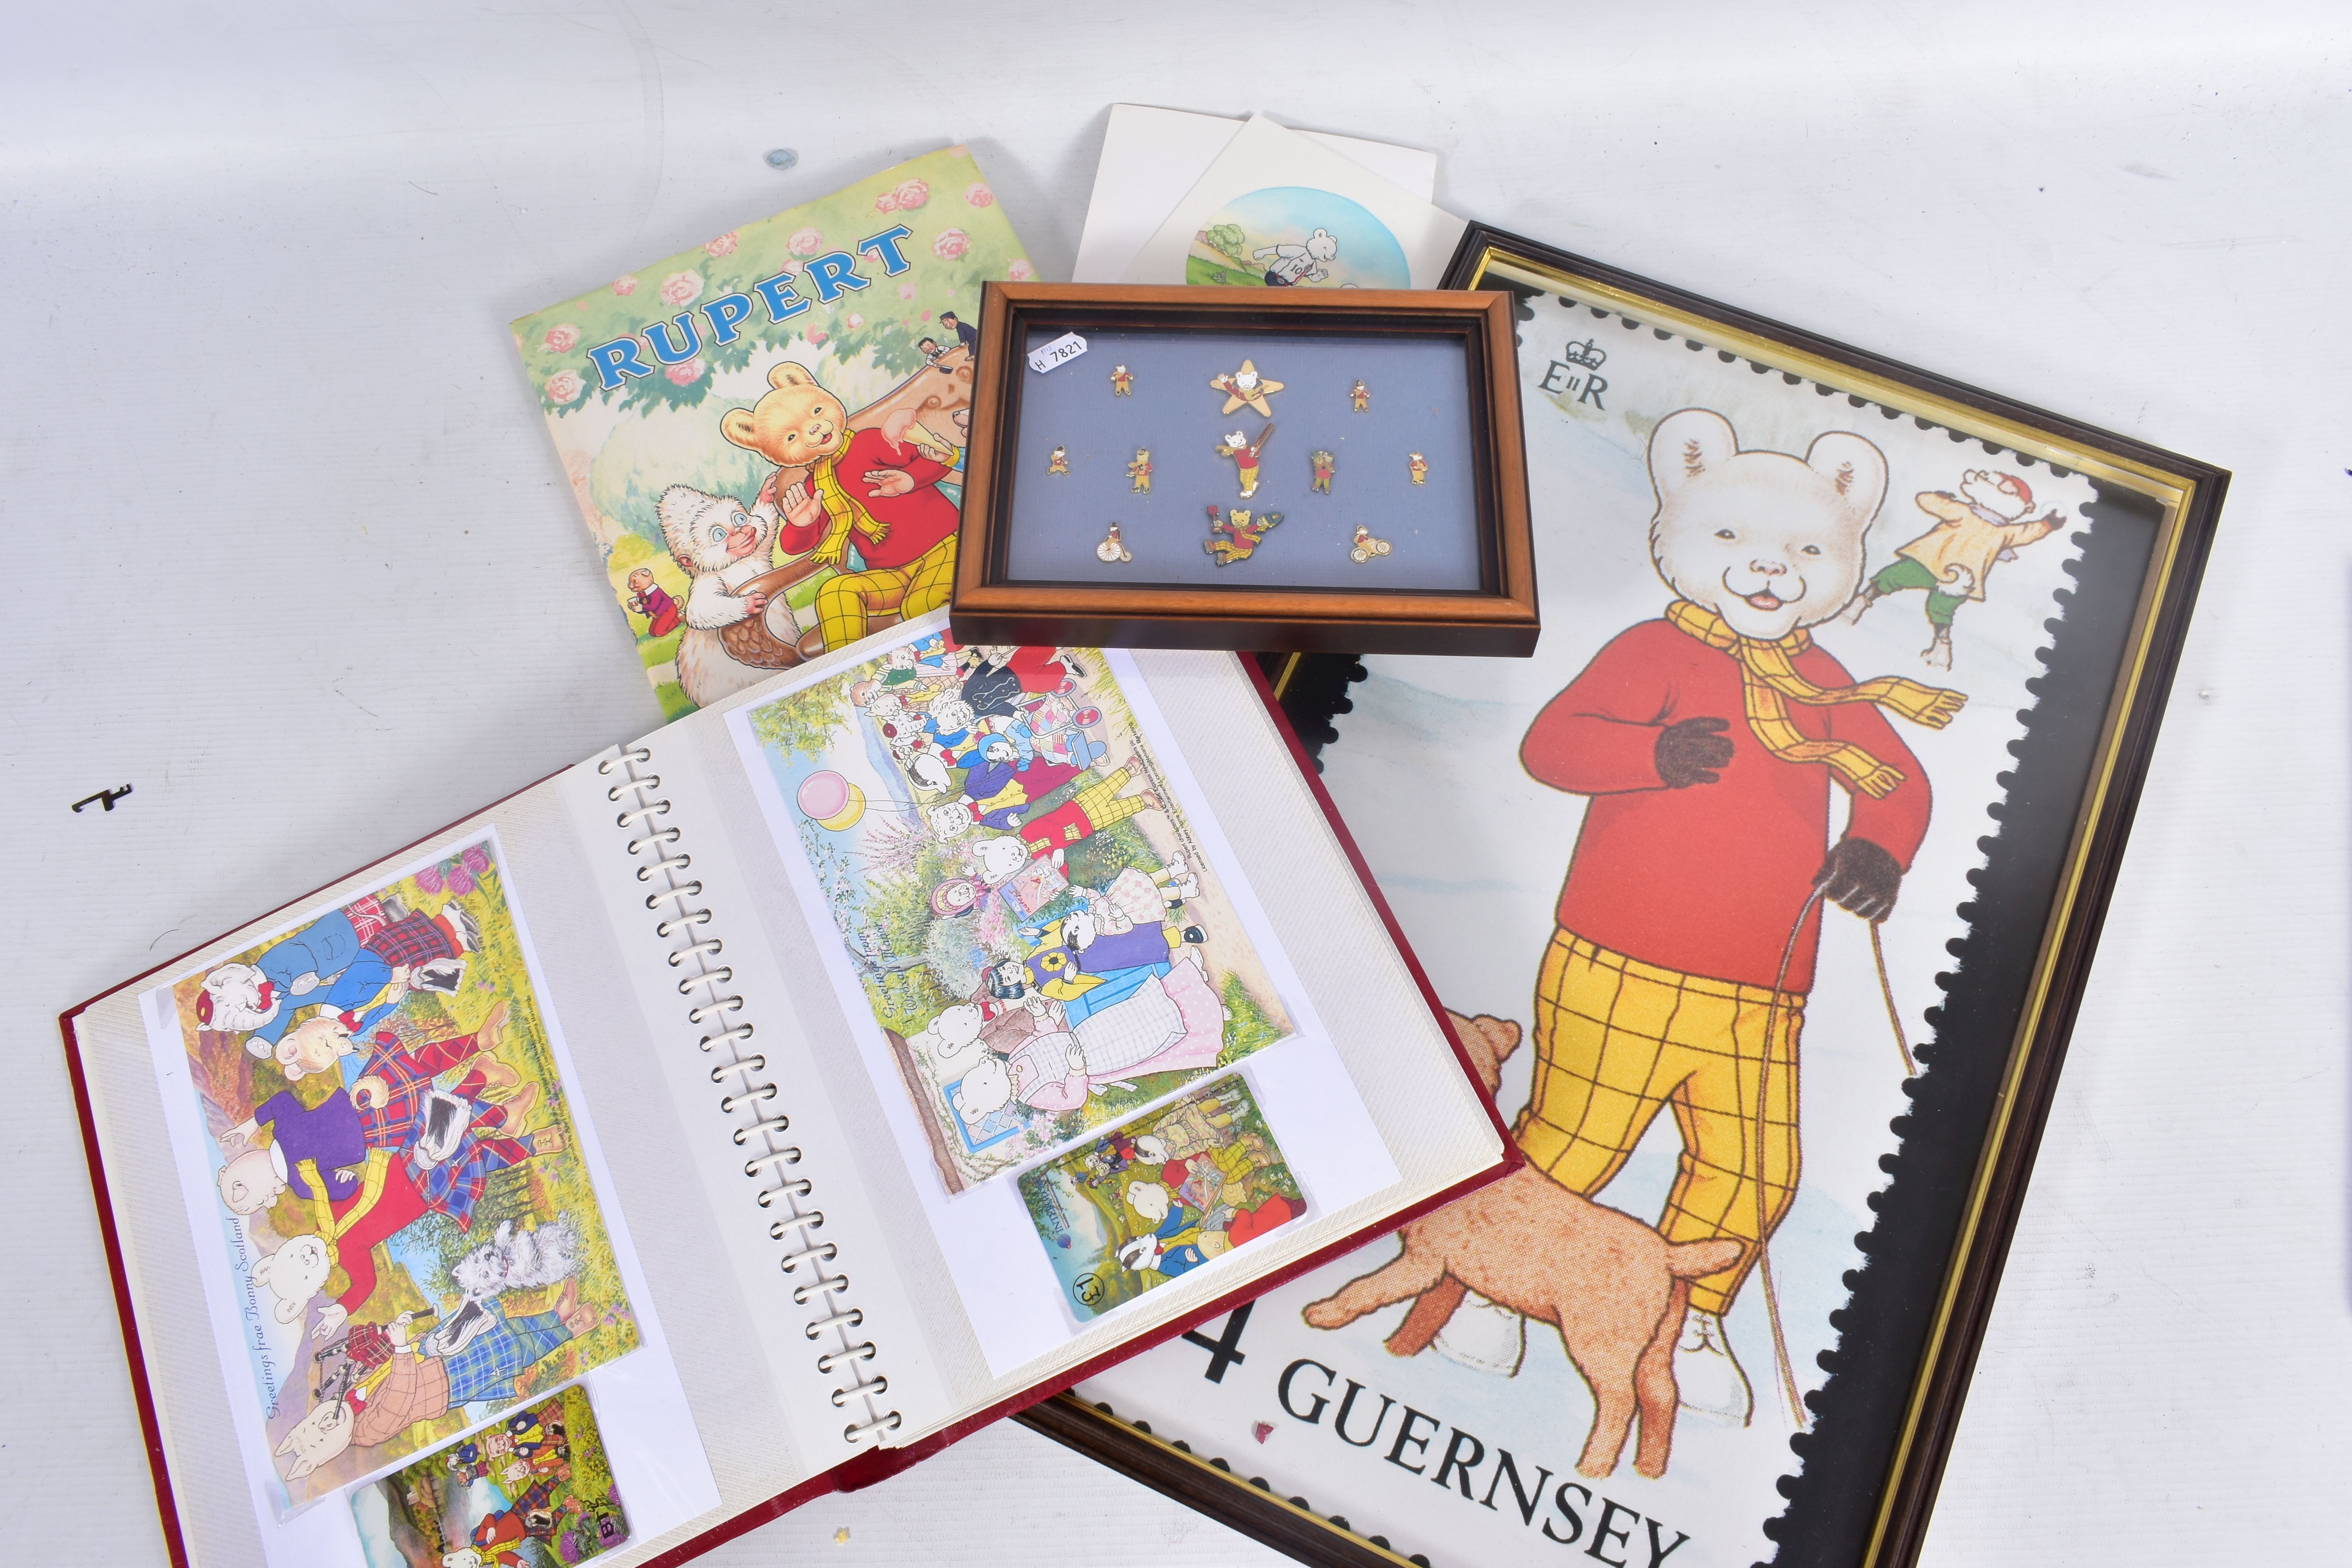 AFTER ALFRED BESTALL THREE SIGNED RUPERT THE BEAR PRINTS, three limited edition signed prints, - Image 9 of 26